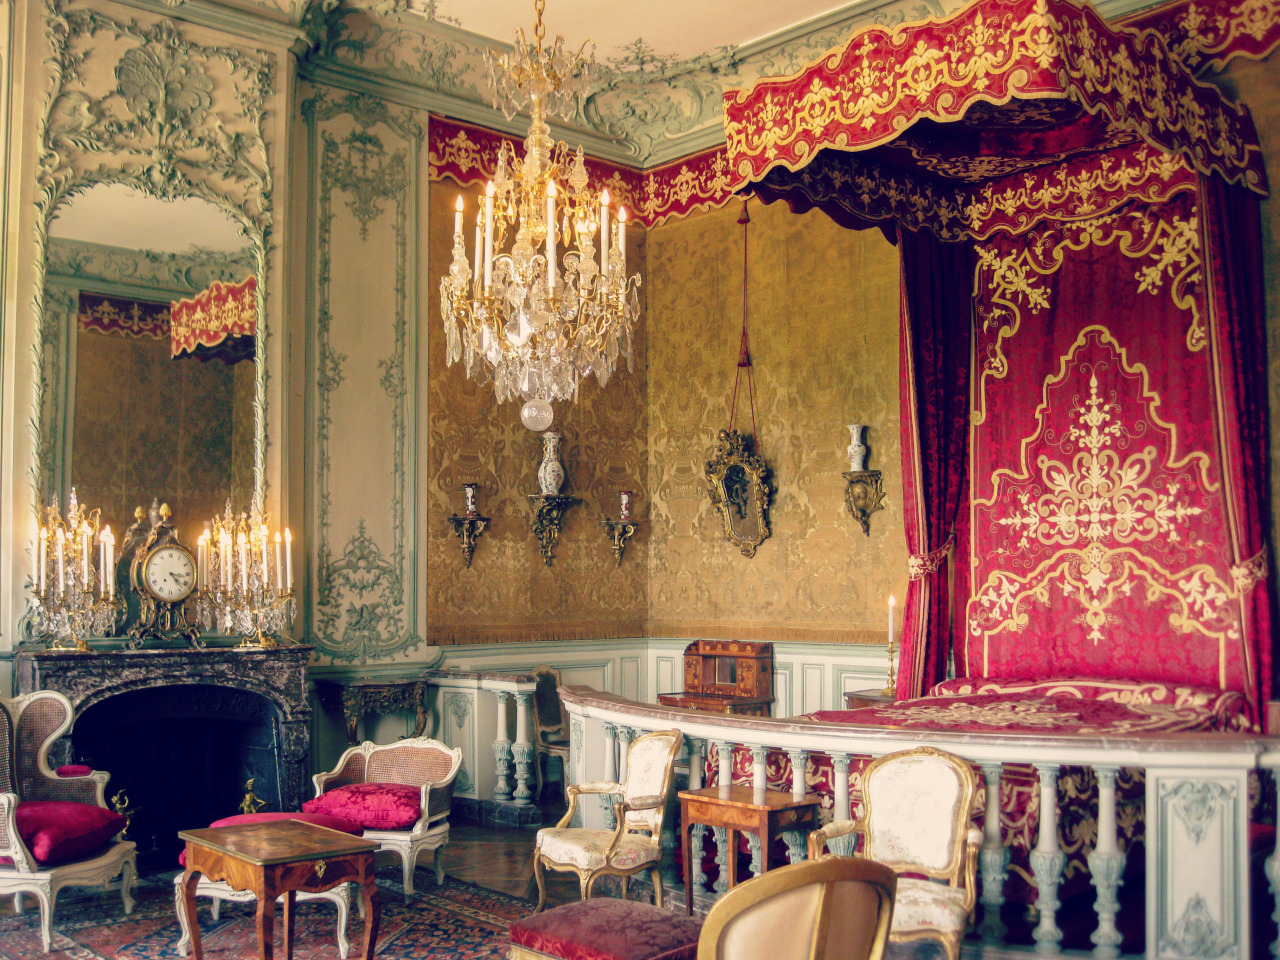 The Grand Bedchamber, Chateau Champs-sur-Marne in France. Photo by Amber Maitrejean.